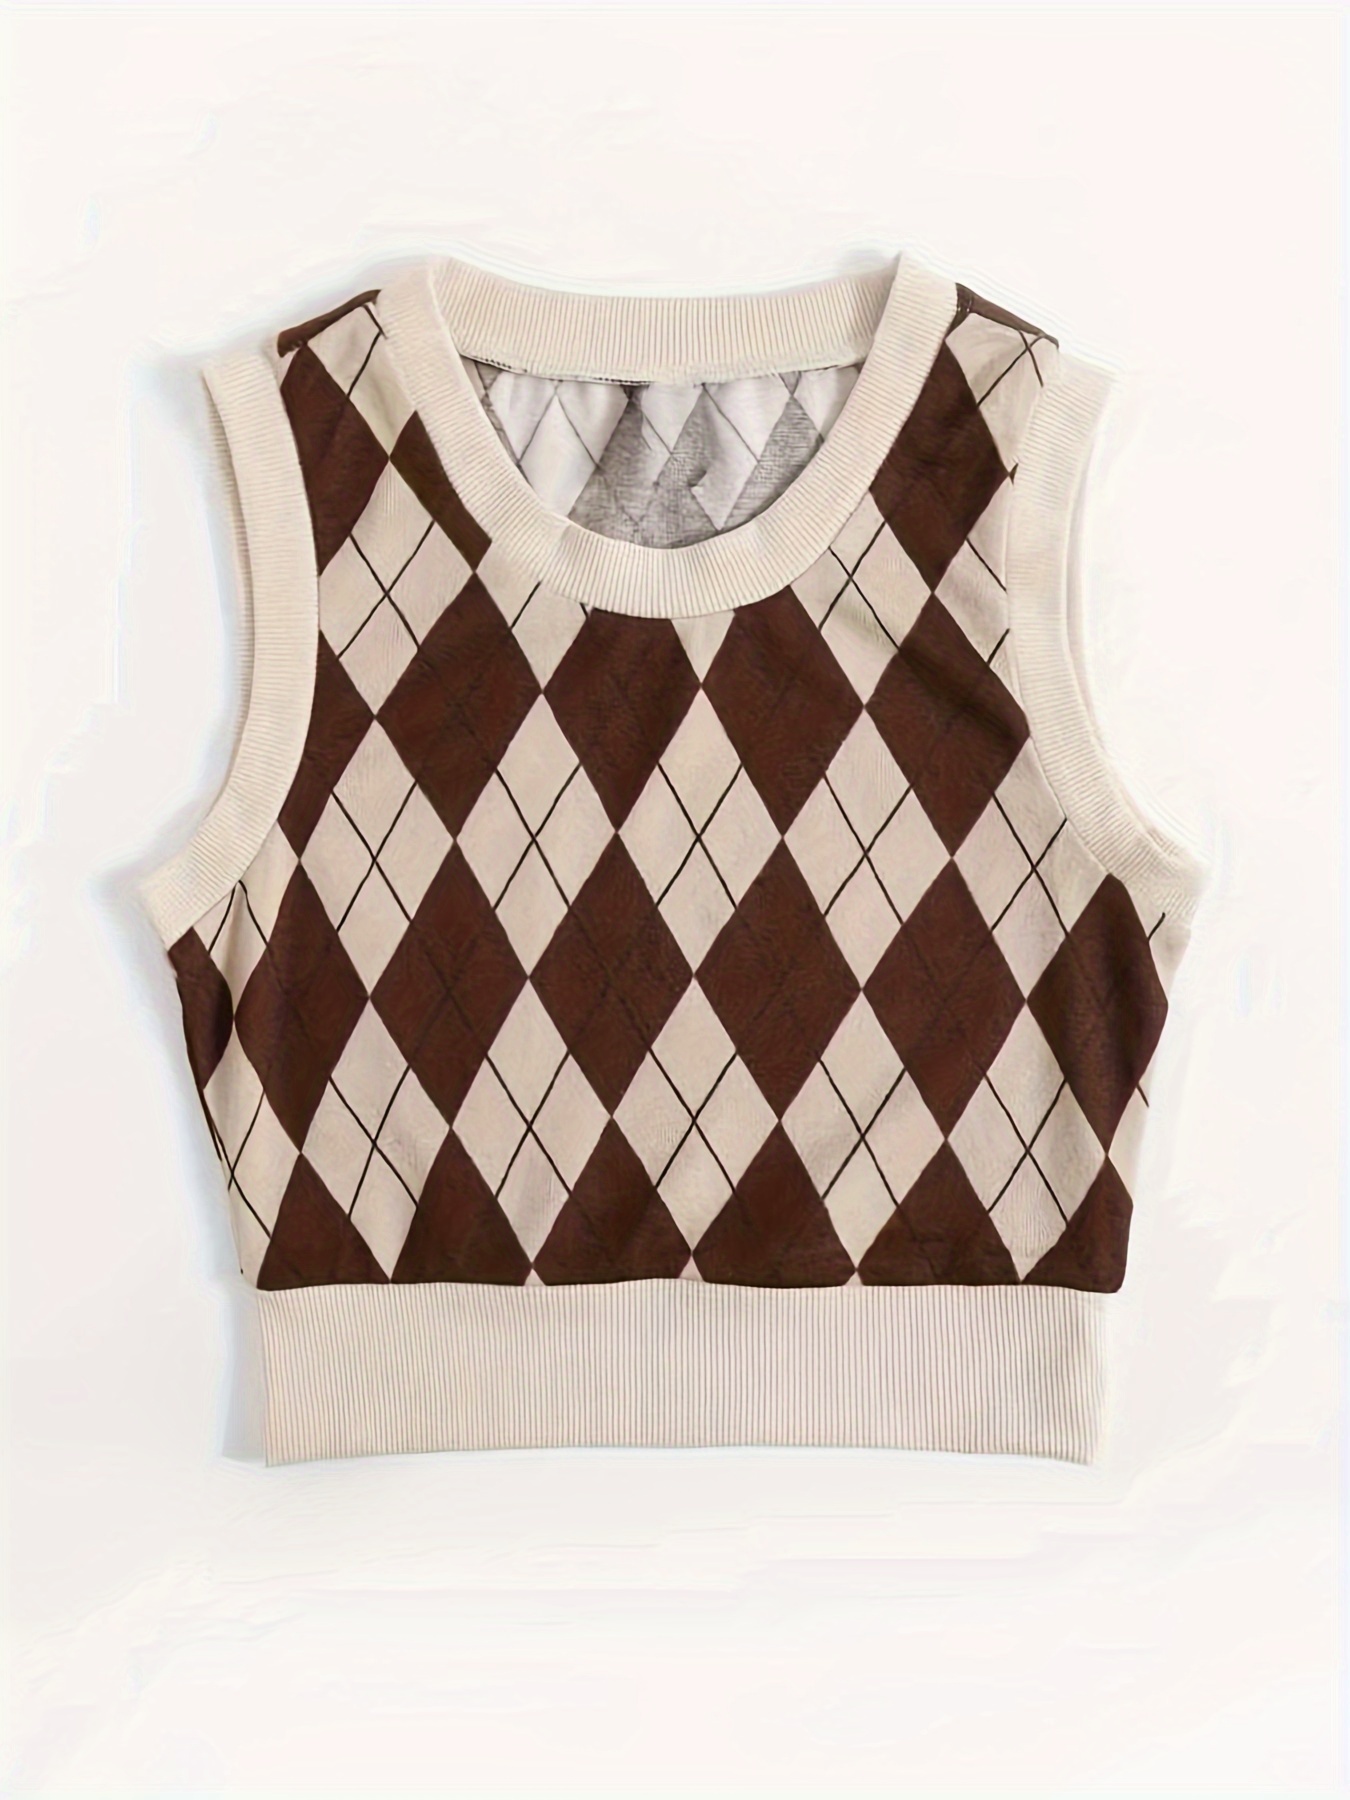 Argyle Pattern Crew Neck Top, Thin Sleeveless Tank Top For Spring & Summer, Women's Clothing